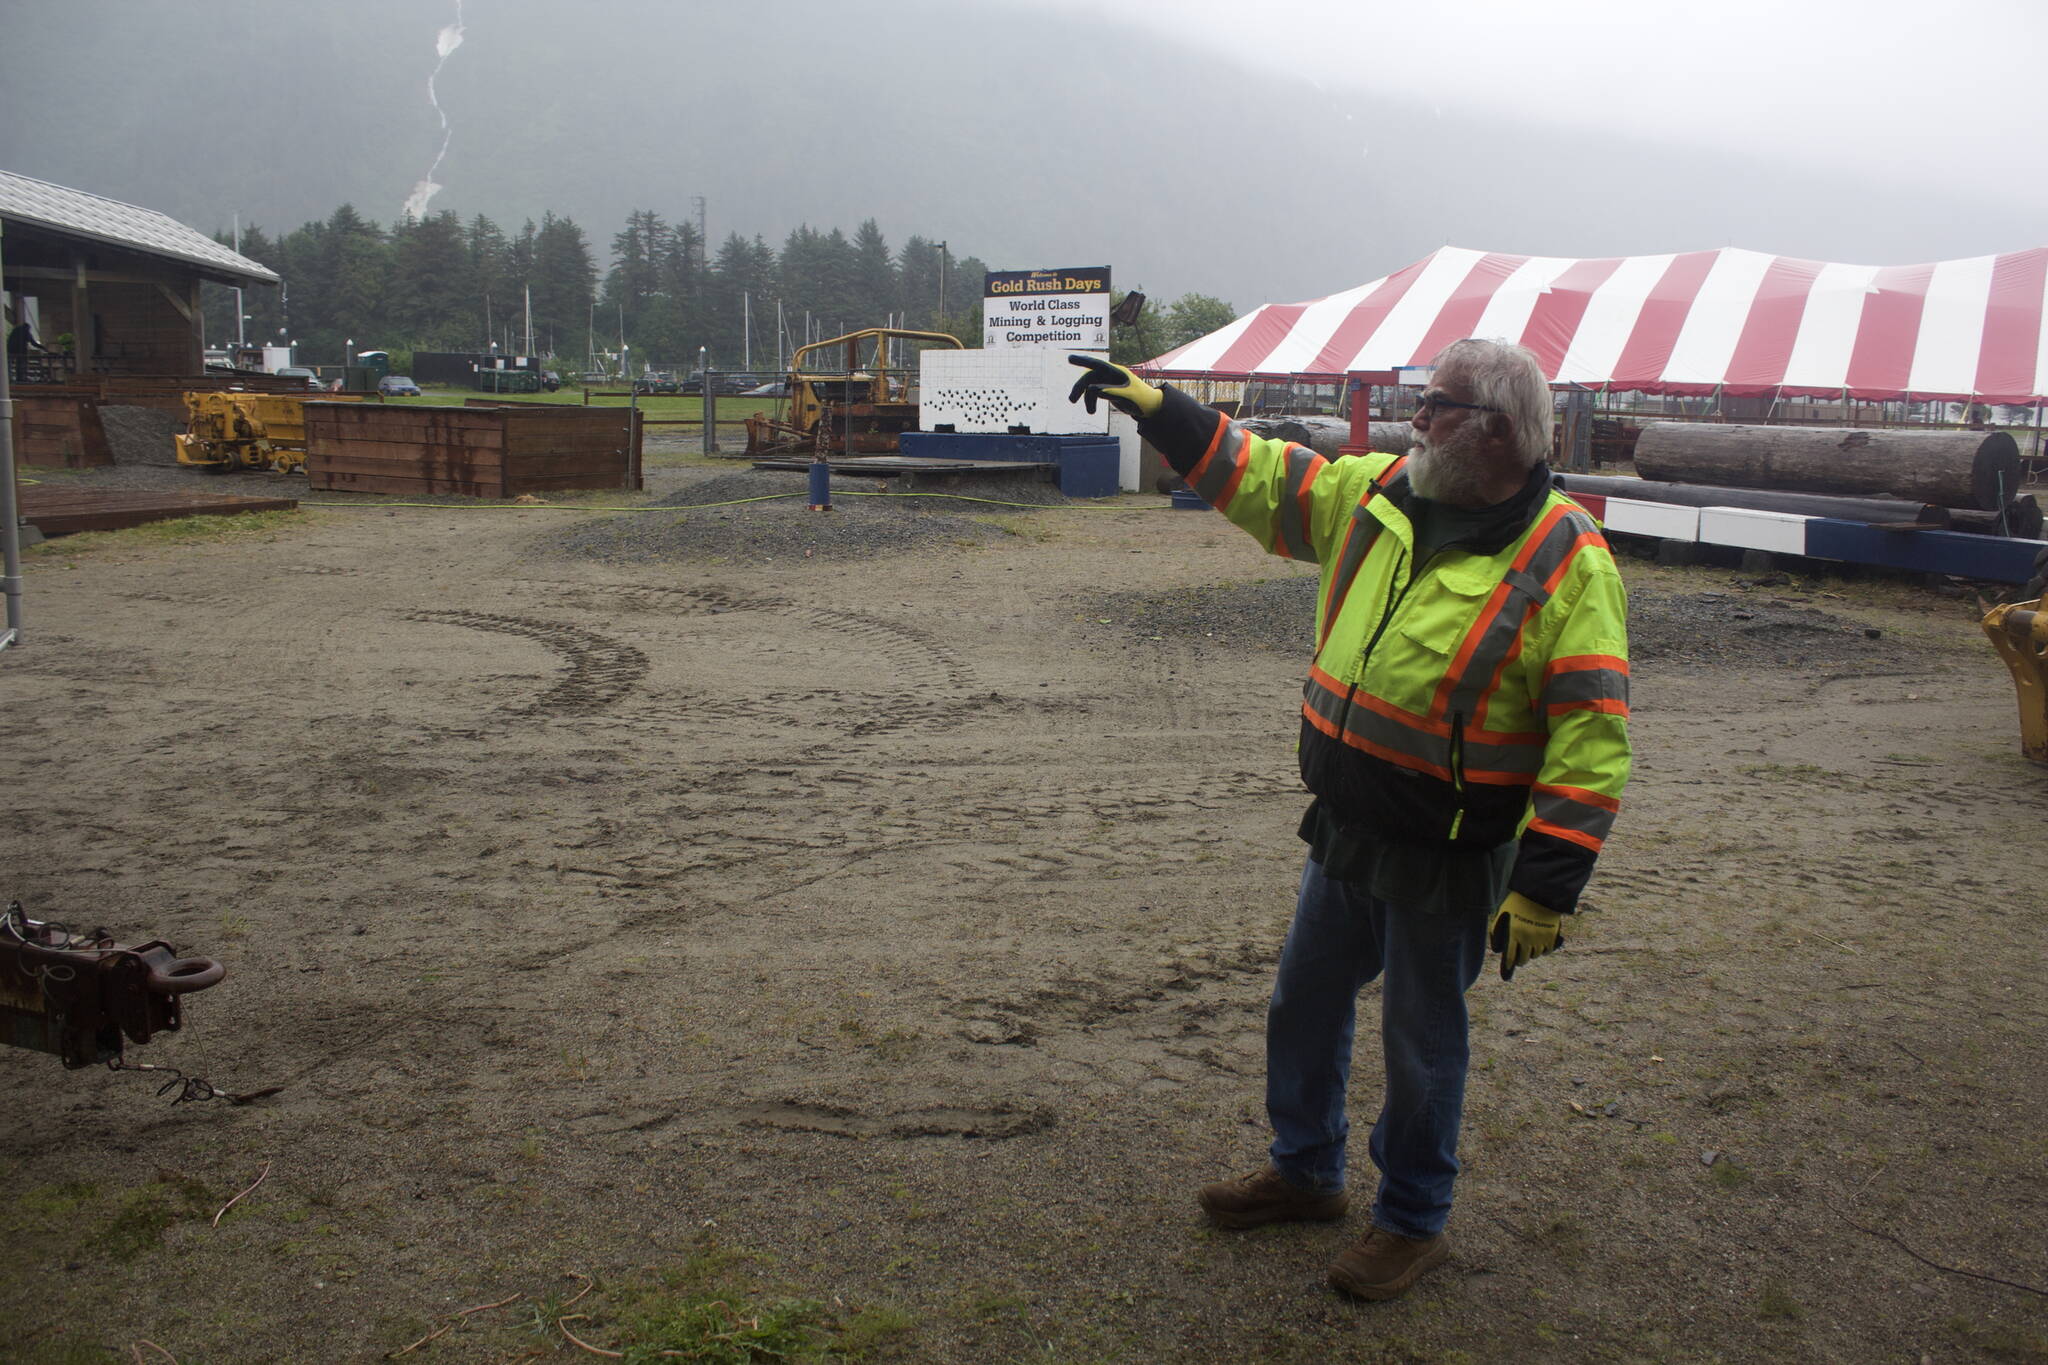 Jerry Harmon, president of Juneau Gold Rush Days and a miner for more than 40 years, shows some of the nearly 500,000 pounds in heavy equipment being brought to Savikko Field for this weekend’s events. The event has attracted an estimated 10,000 people at its peak, but was cancelled the past two years due to the COVID-19 pandemic. (Mark Sabbatini / Juneau Empire)